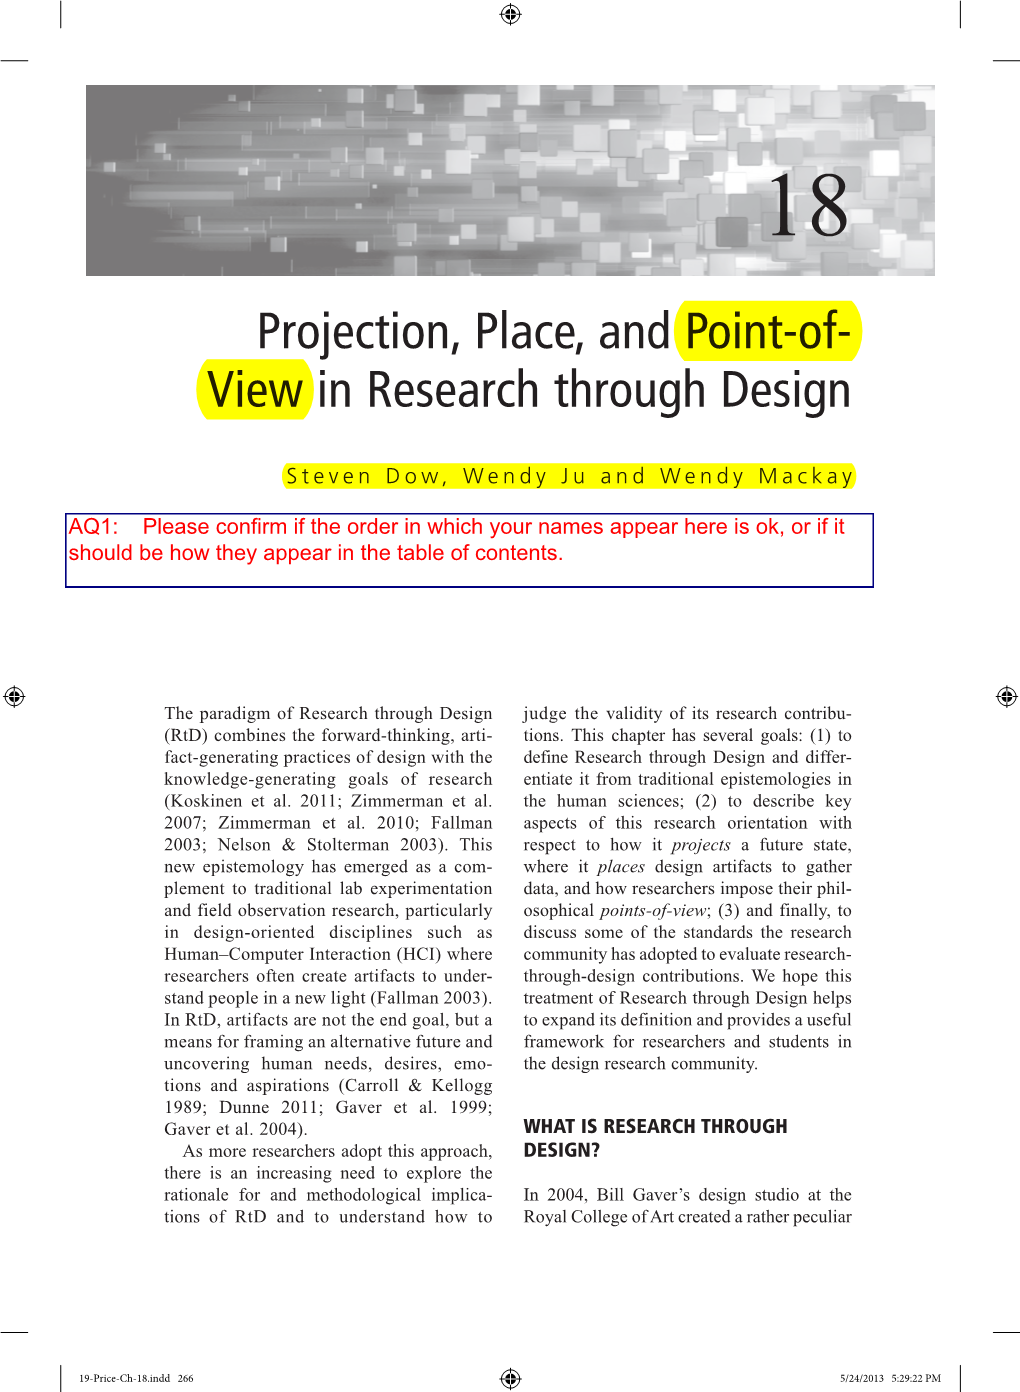 View in Research Through Design